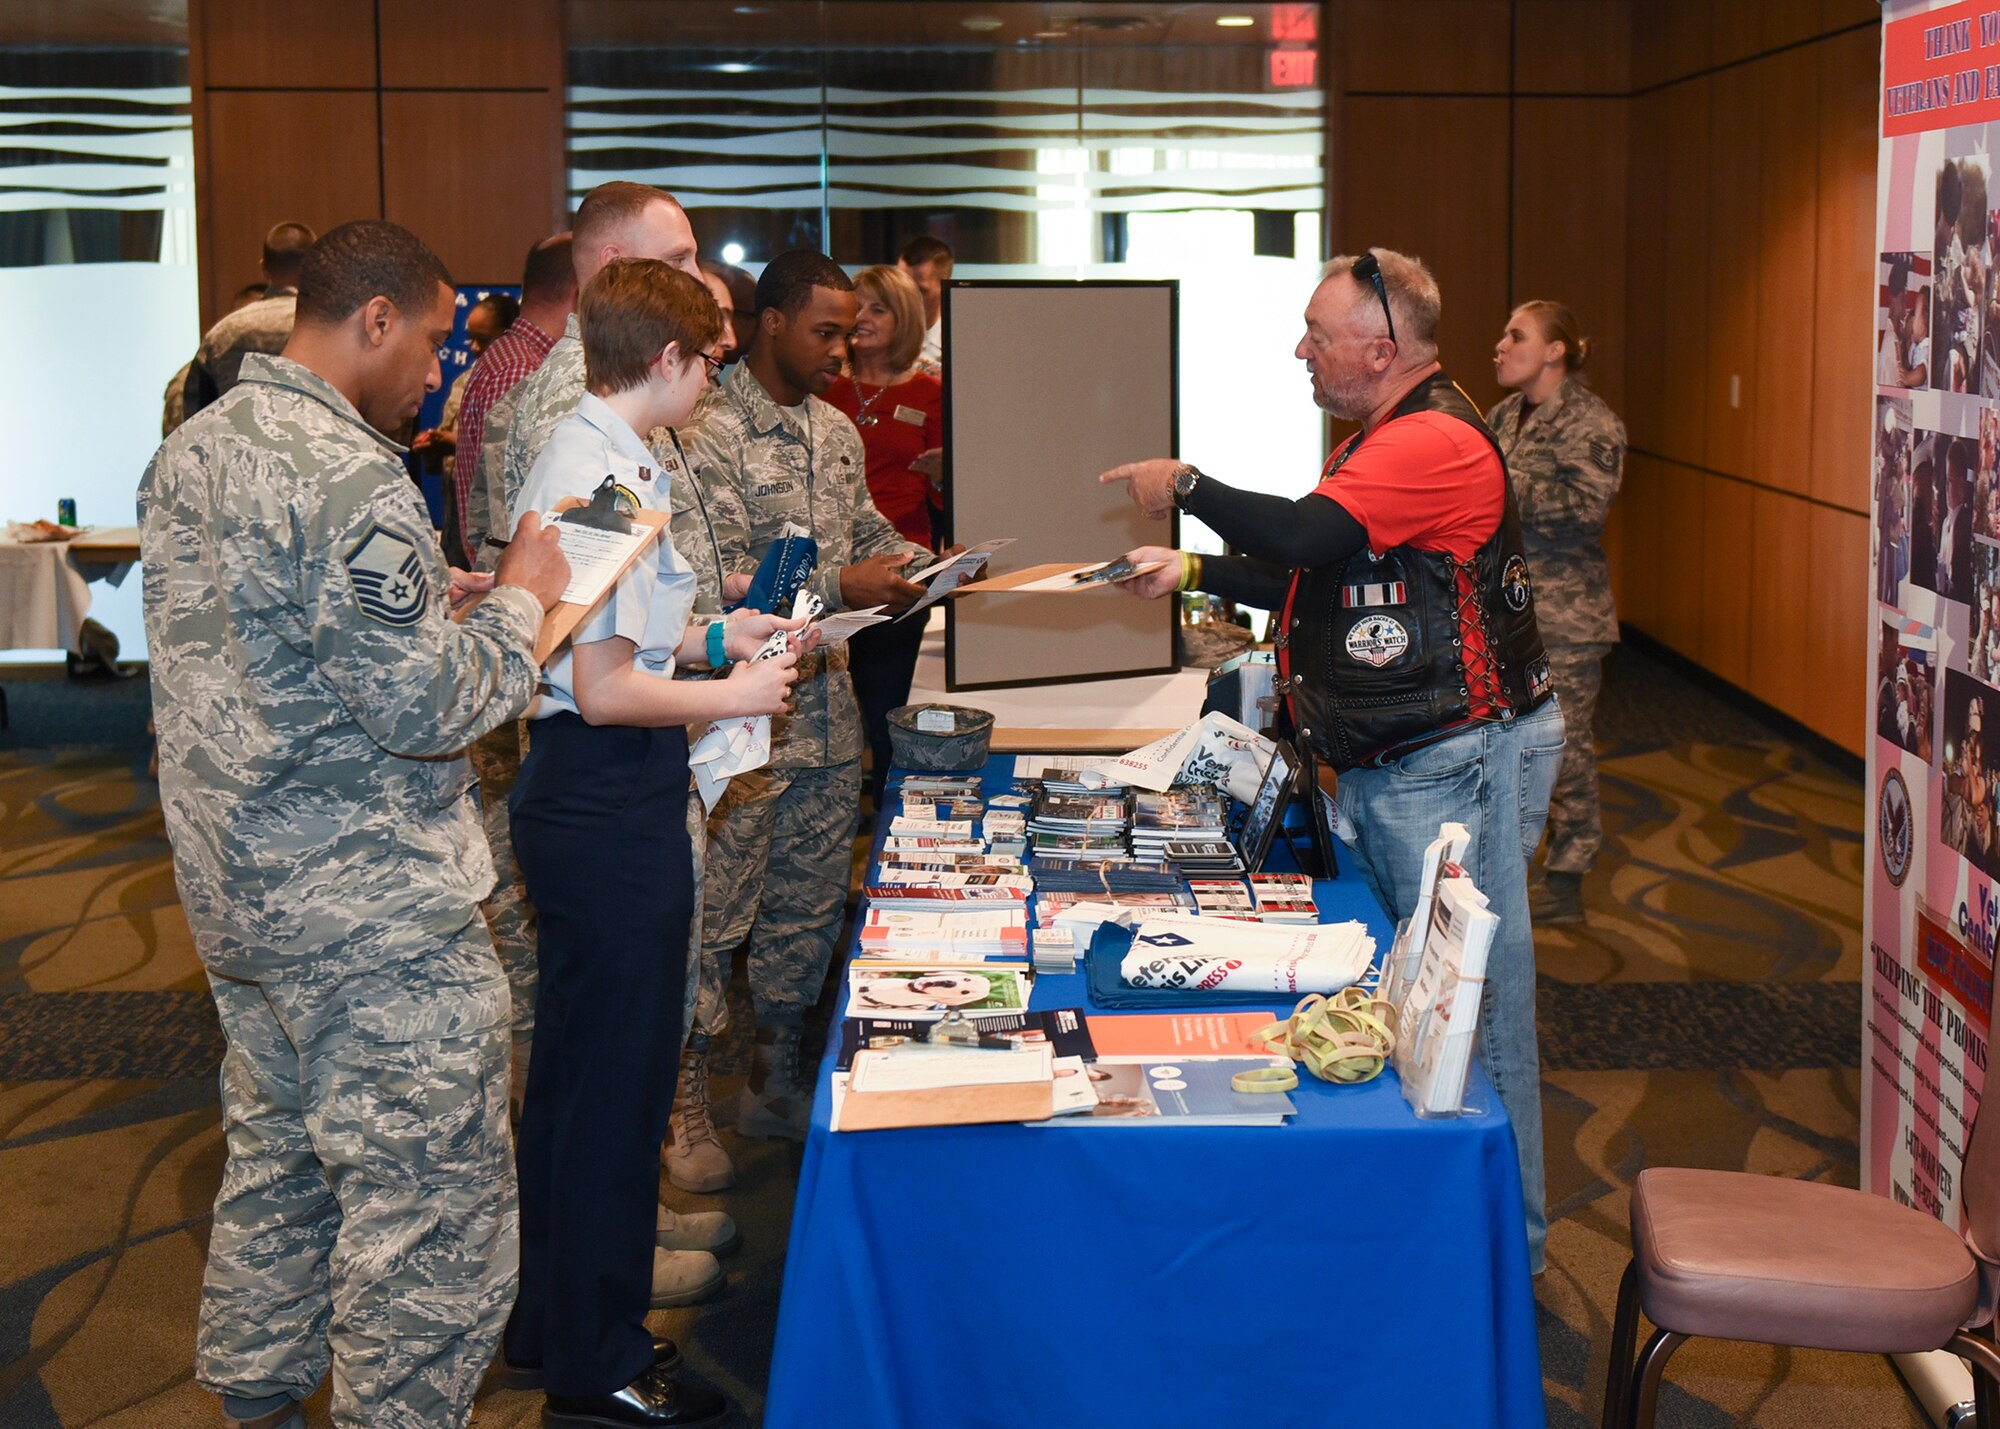 Team Tyndall Airmen and Junior ROTC cadets from Rutherford High School receive information from a veterans support organization at the professional organization exhibition at the Horizons Community Center during Tyndall’s Comprehensive Airman Fitness day, Feb. 3, 2017. The exhibition showcased multiple professional development organizations and support agencies in the Panama City area. (U.S. Air Force photo by Senior Airman Dustin Mullen/Released)